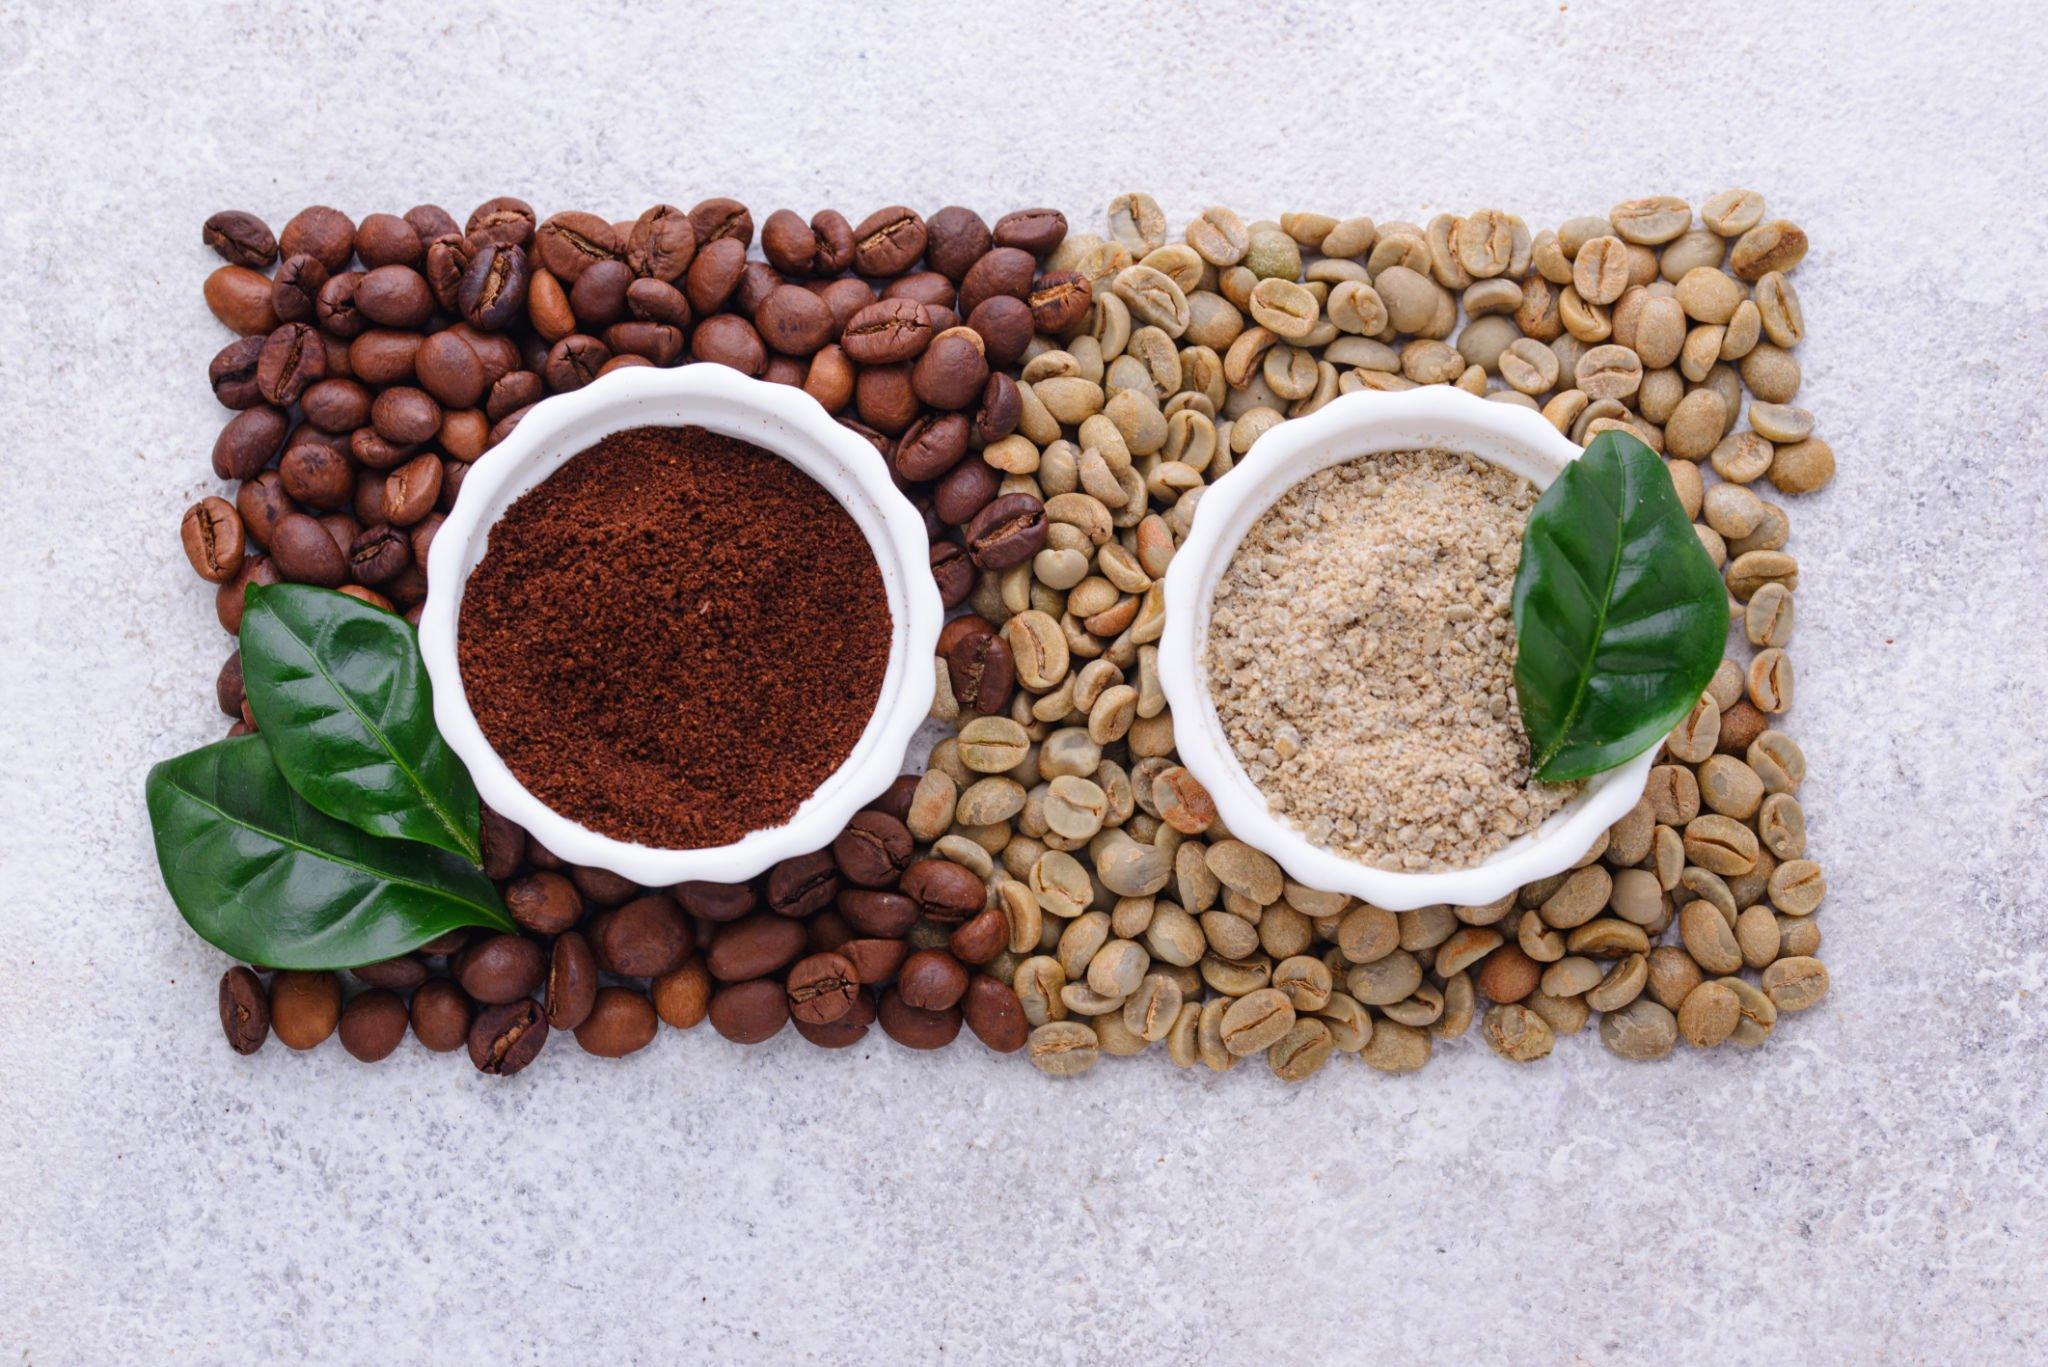 What Is the Purpose of Green Coffee Bean Extract?